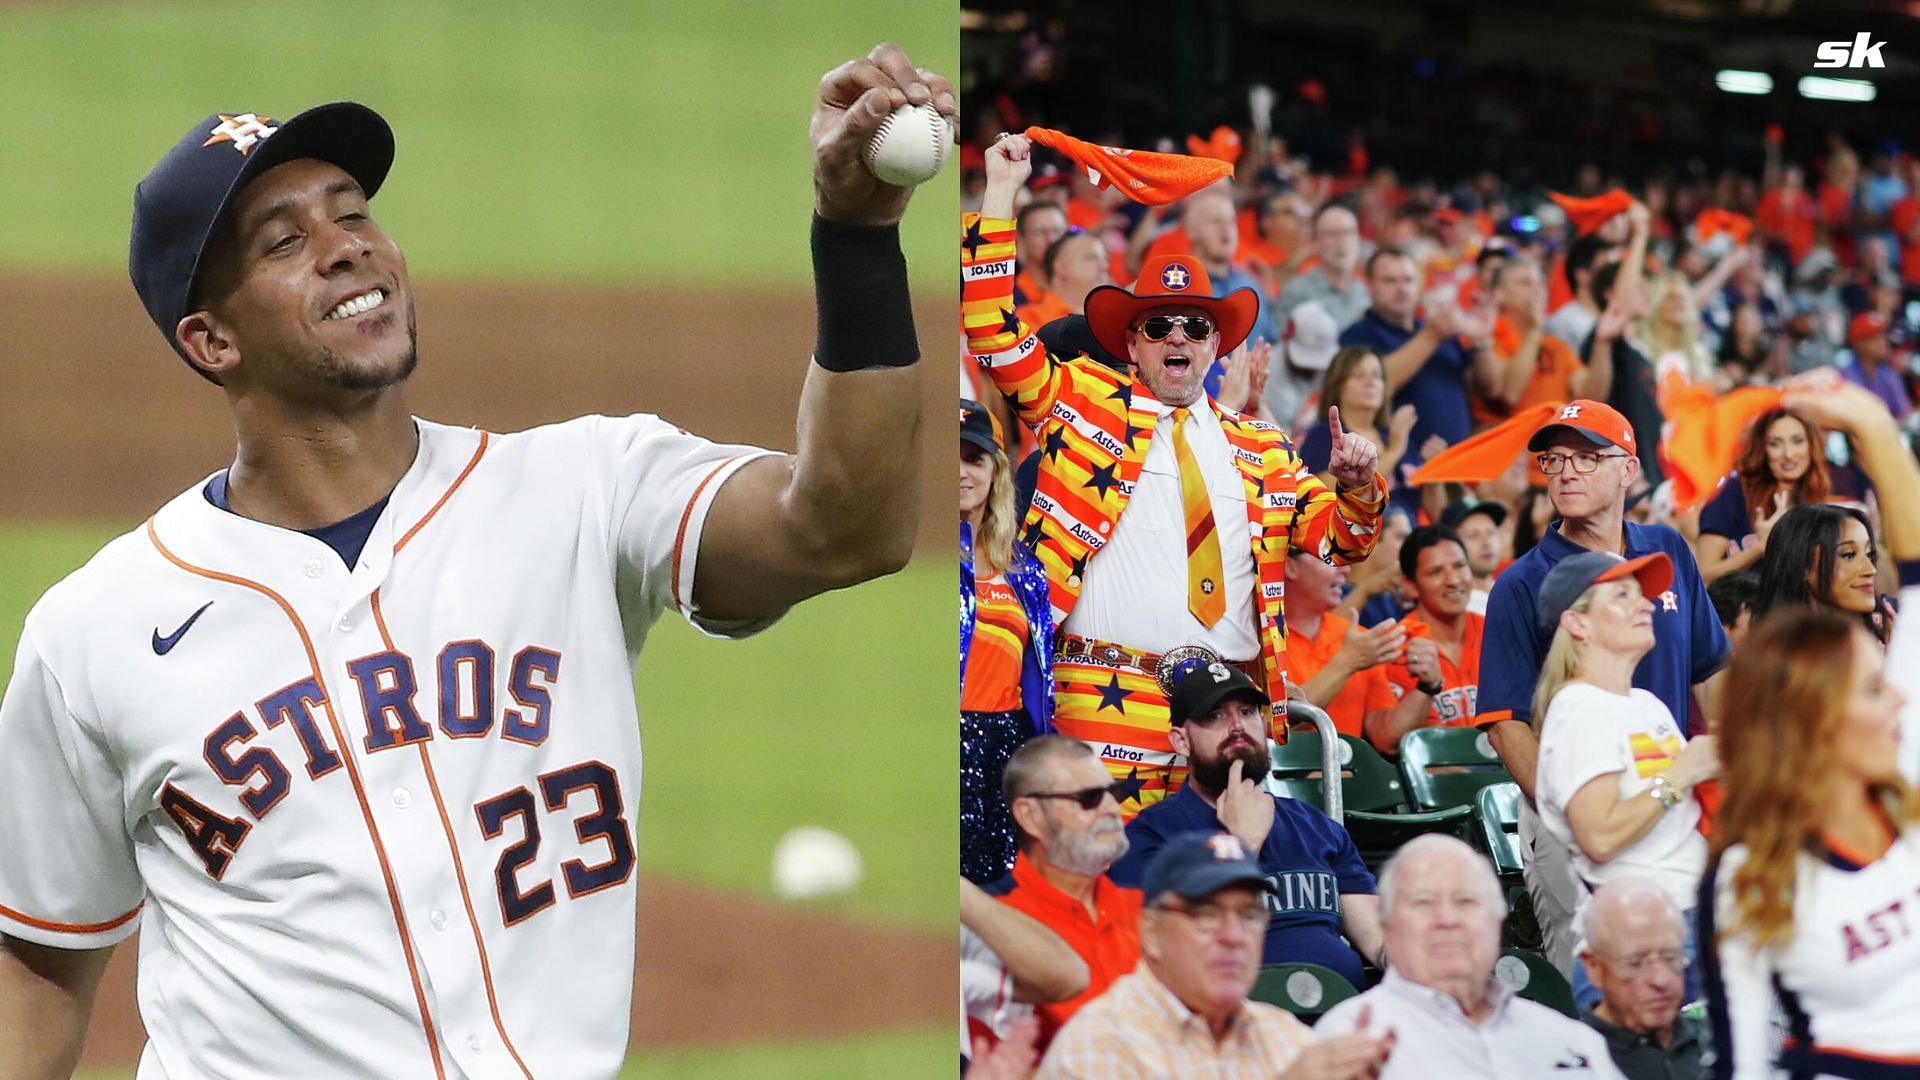 Astros fans surprised over Dusty Baker's decision to bench Michael Brantley  for ALCS opener vs. Rangers: I'll never understand [these] lineups